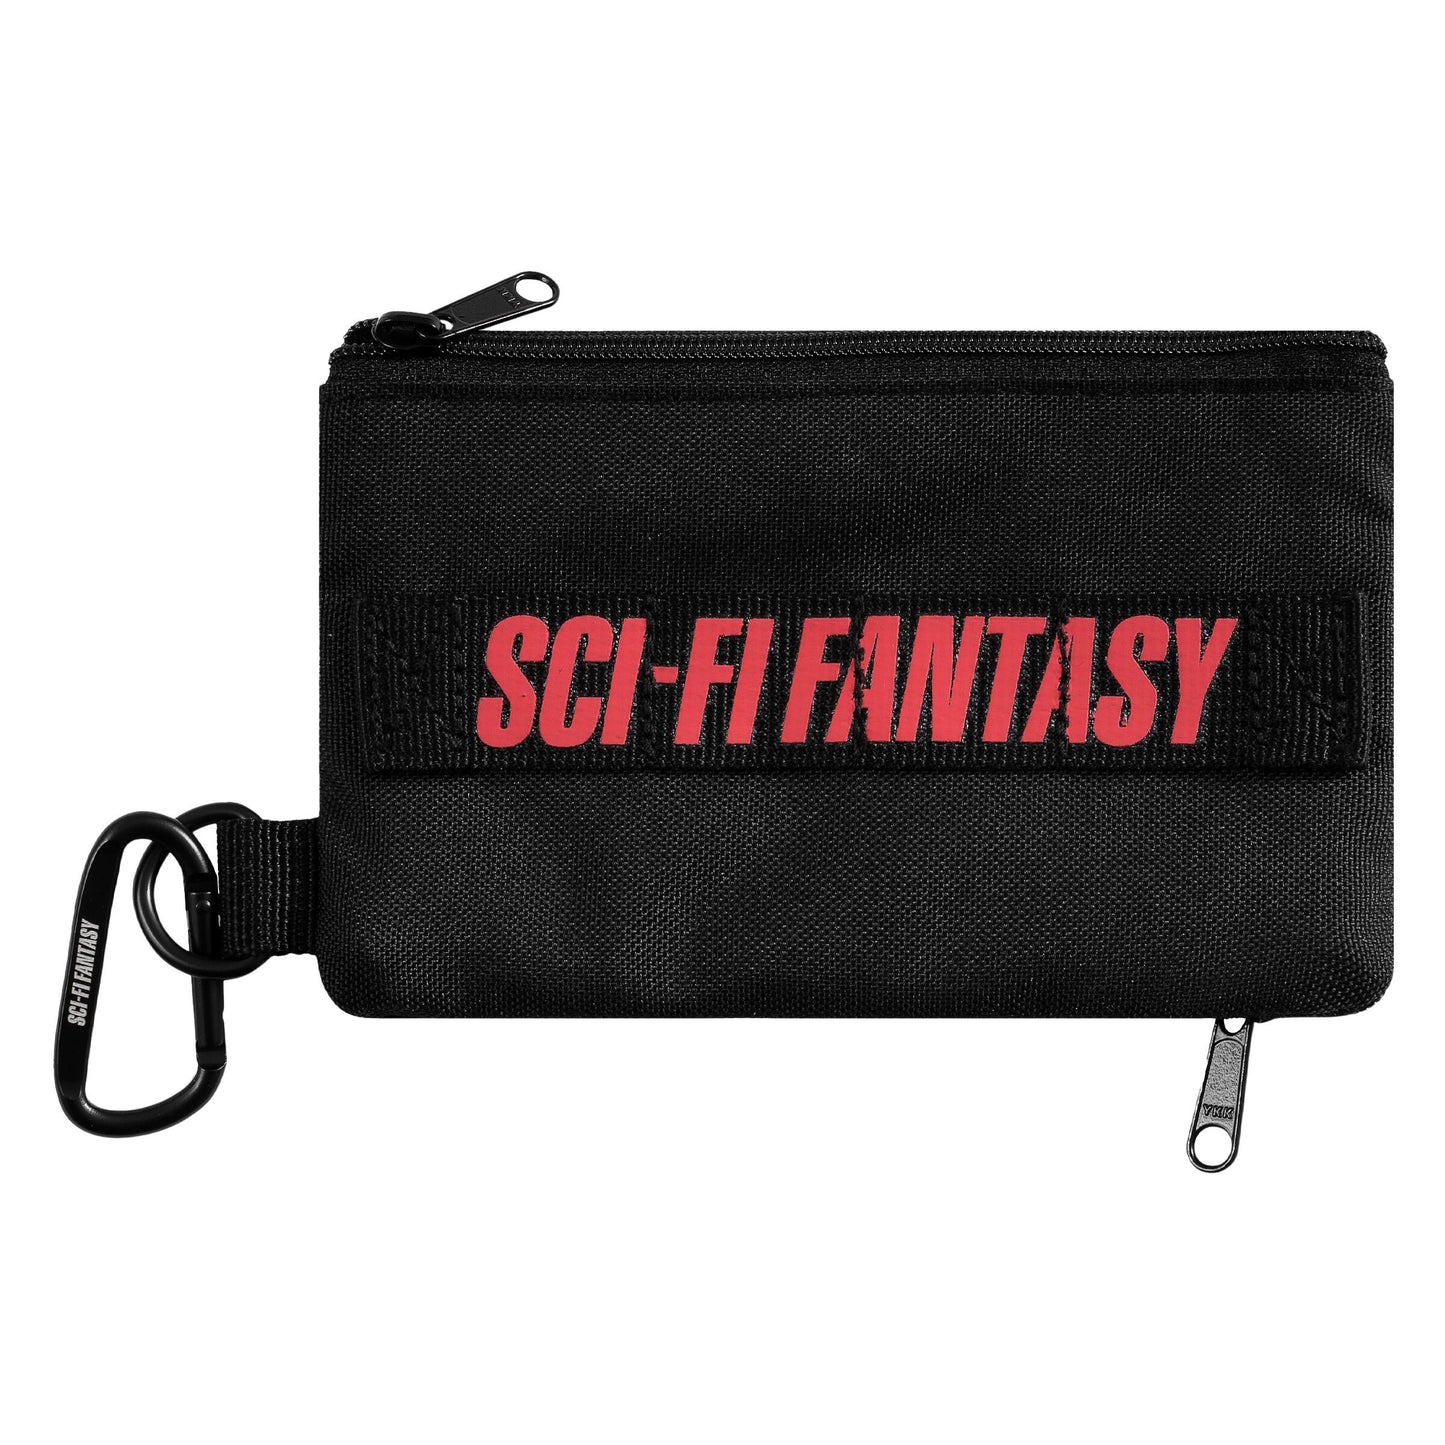 Sci-Fi Fantasy Carry-All Pouch: Assorted Colors